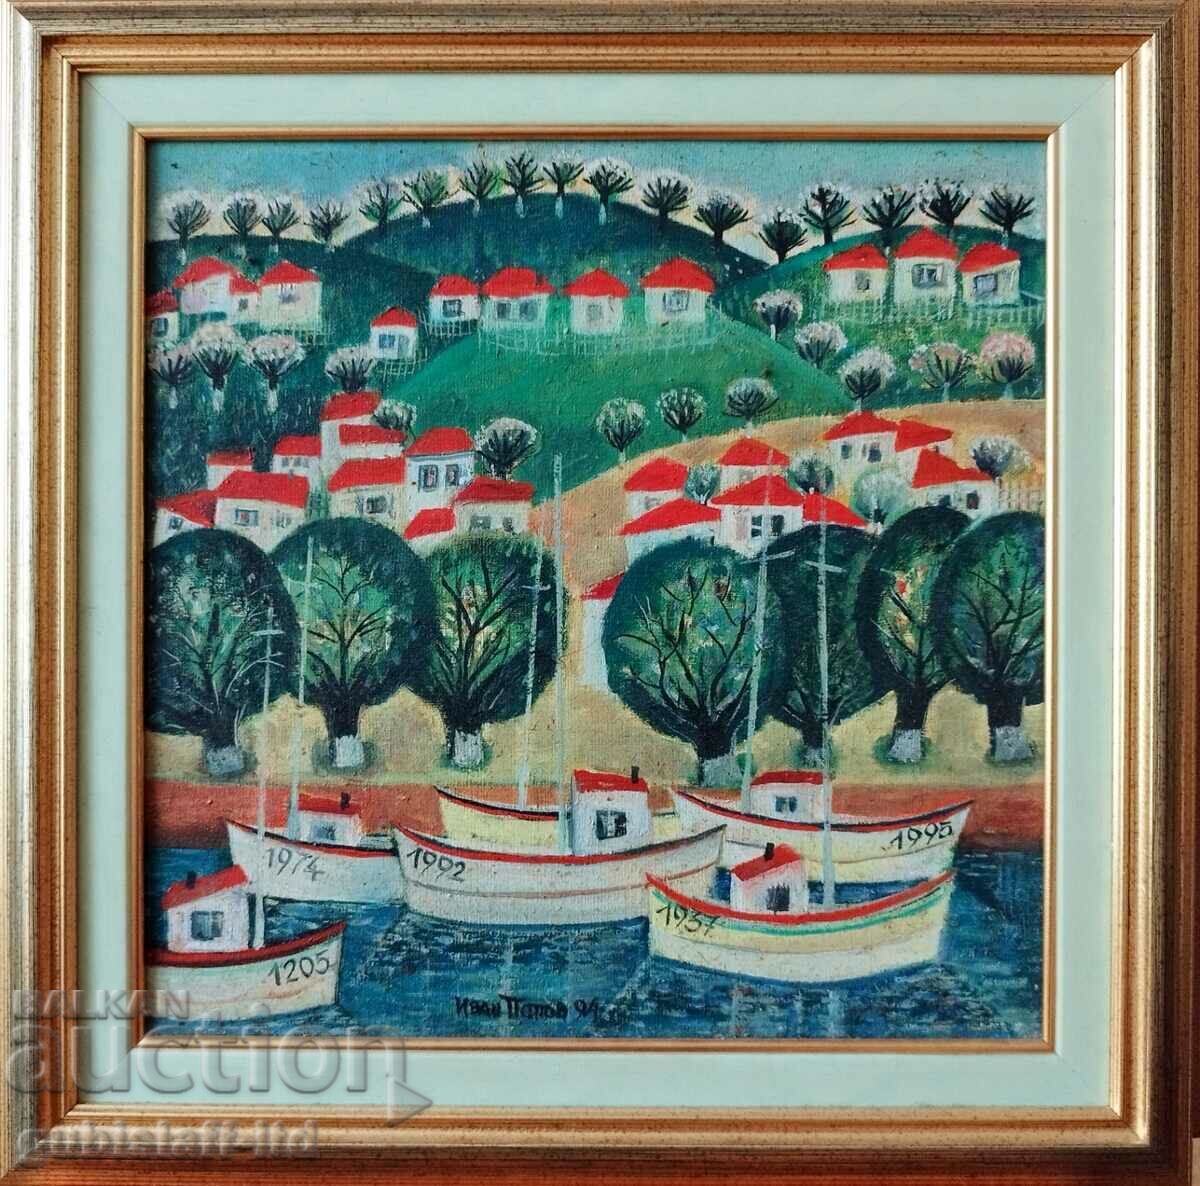 Picture, "Settlement by the sea", art. Ivan Popov, 1994